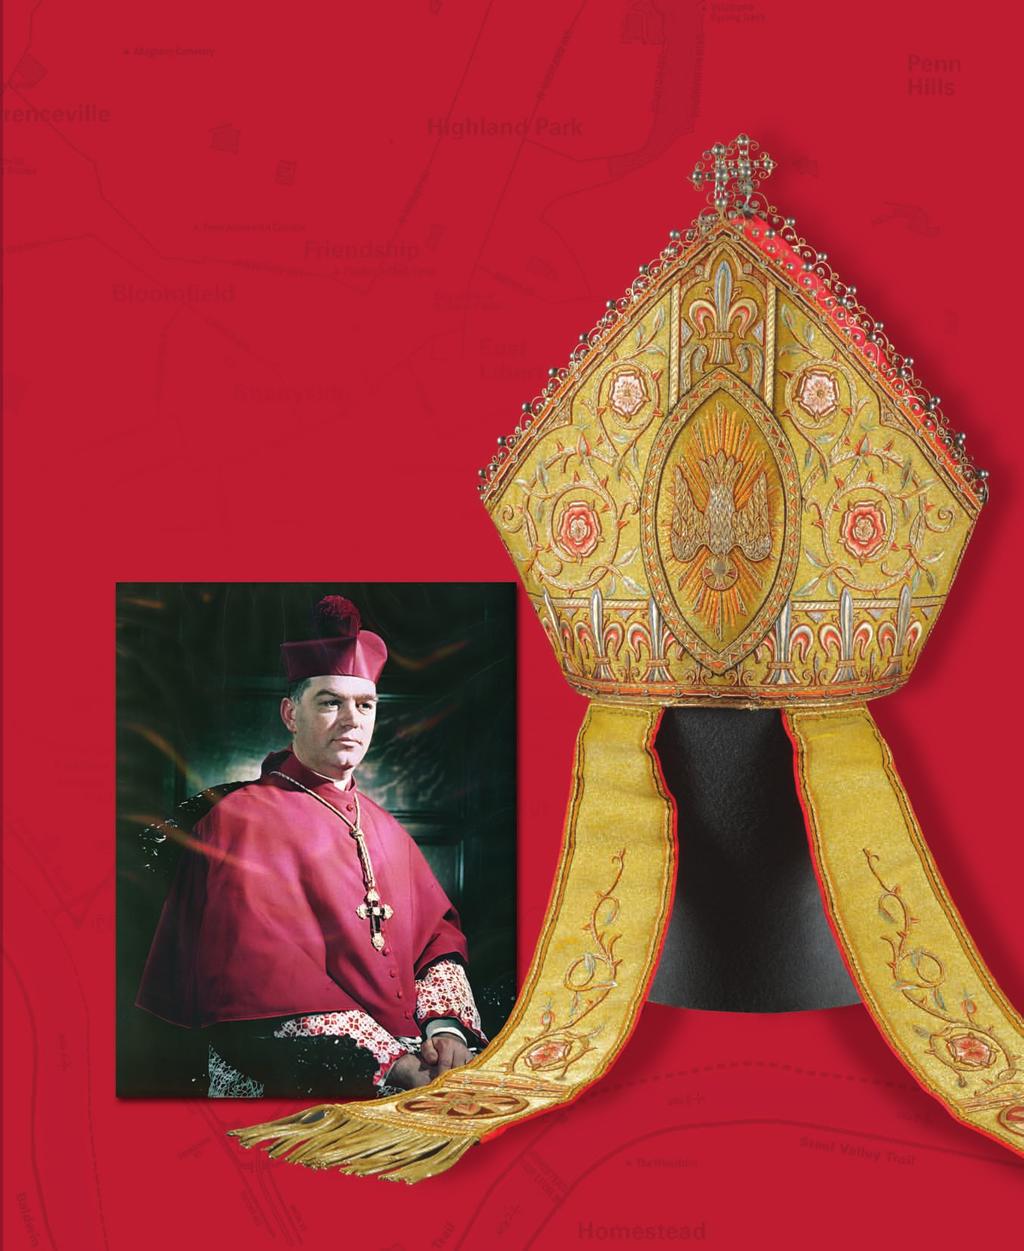 Ornate Mitre: Bishop John F. Deardon (served 1950-1958) may have been described by his mother as quiet and undramatic, but his consecration was quite the contrary.